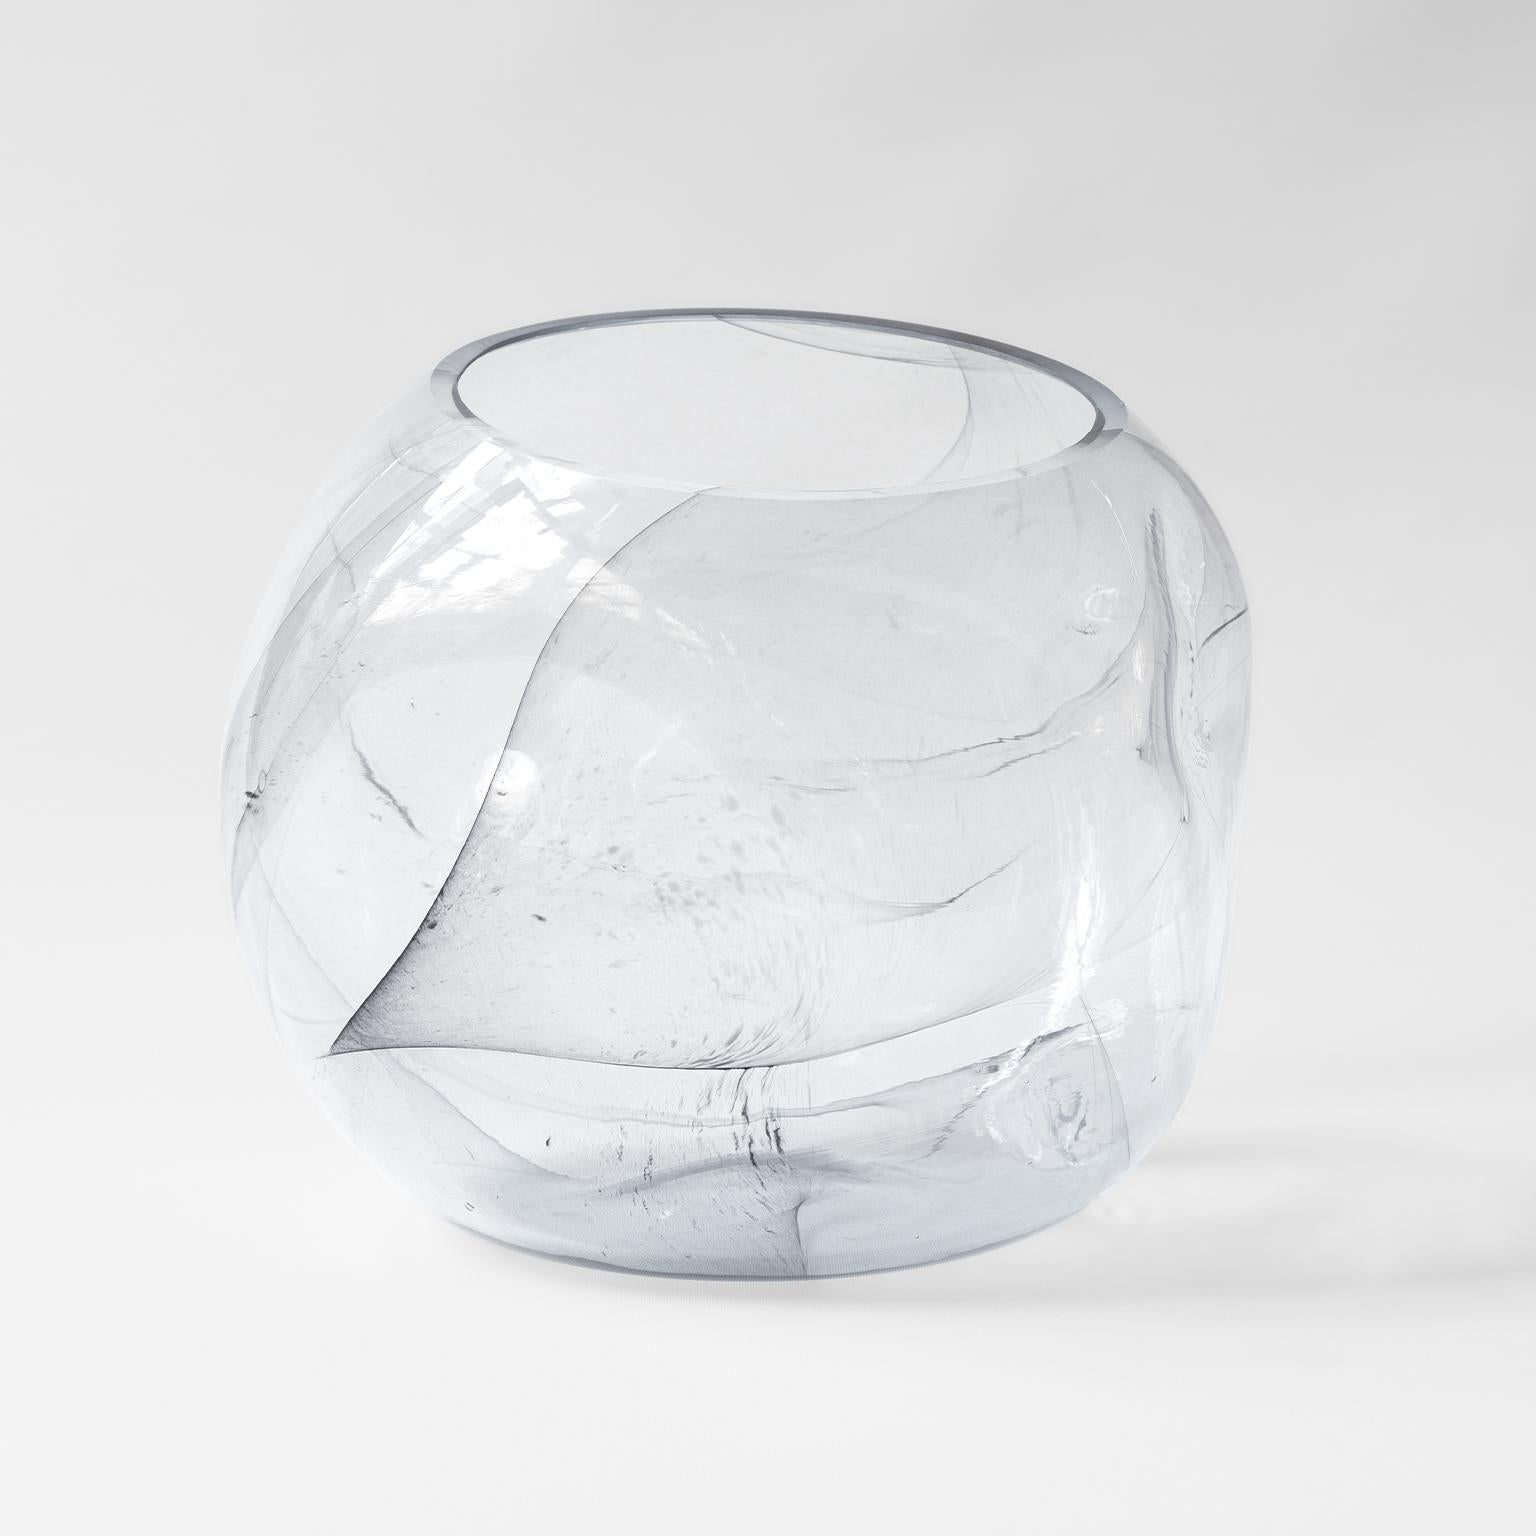 Hand-Crafted Blown Glass Bubble Vase